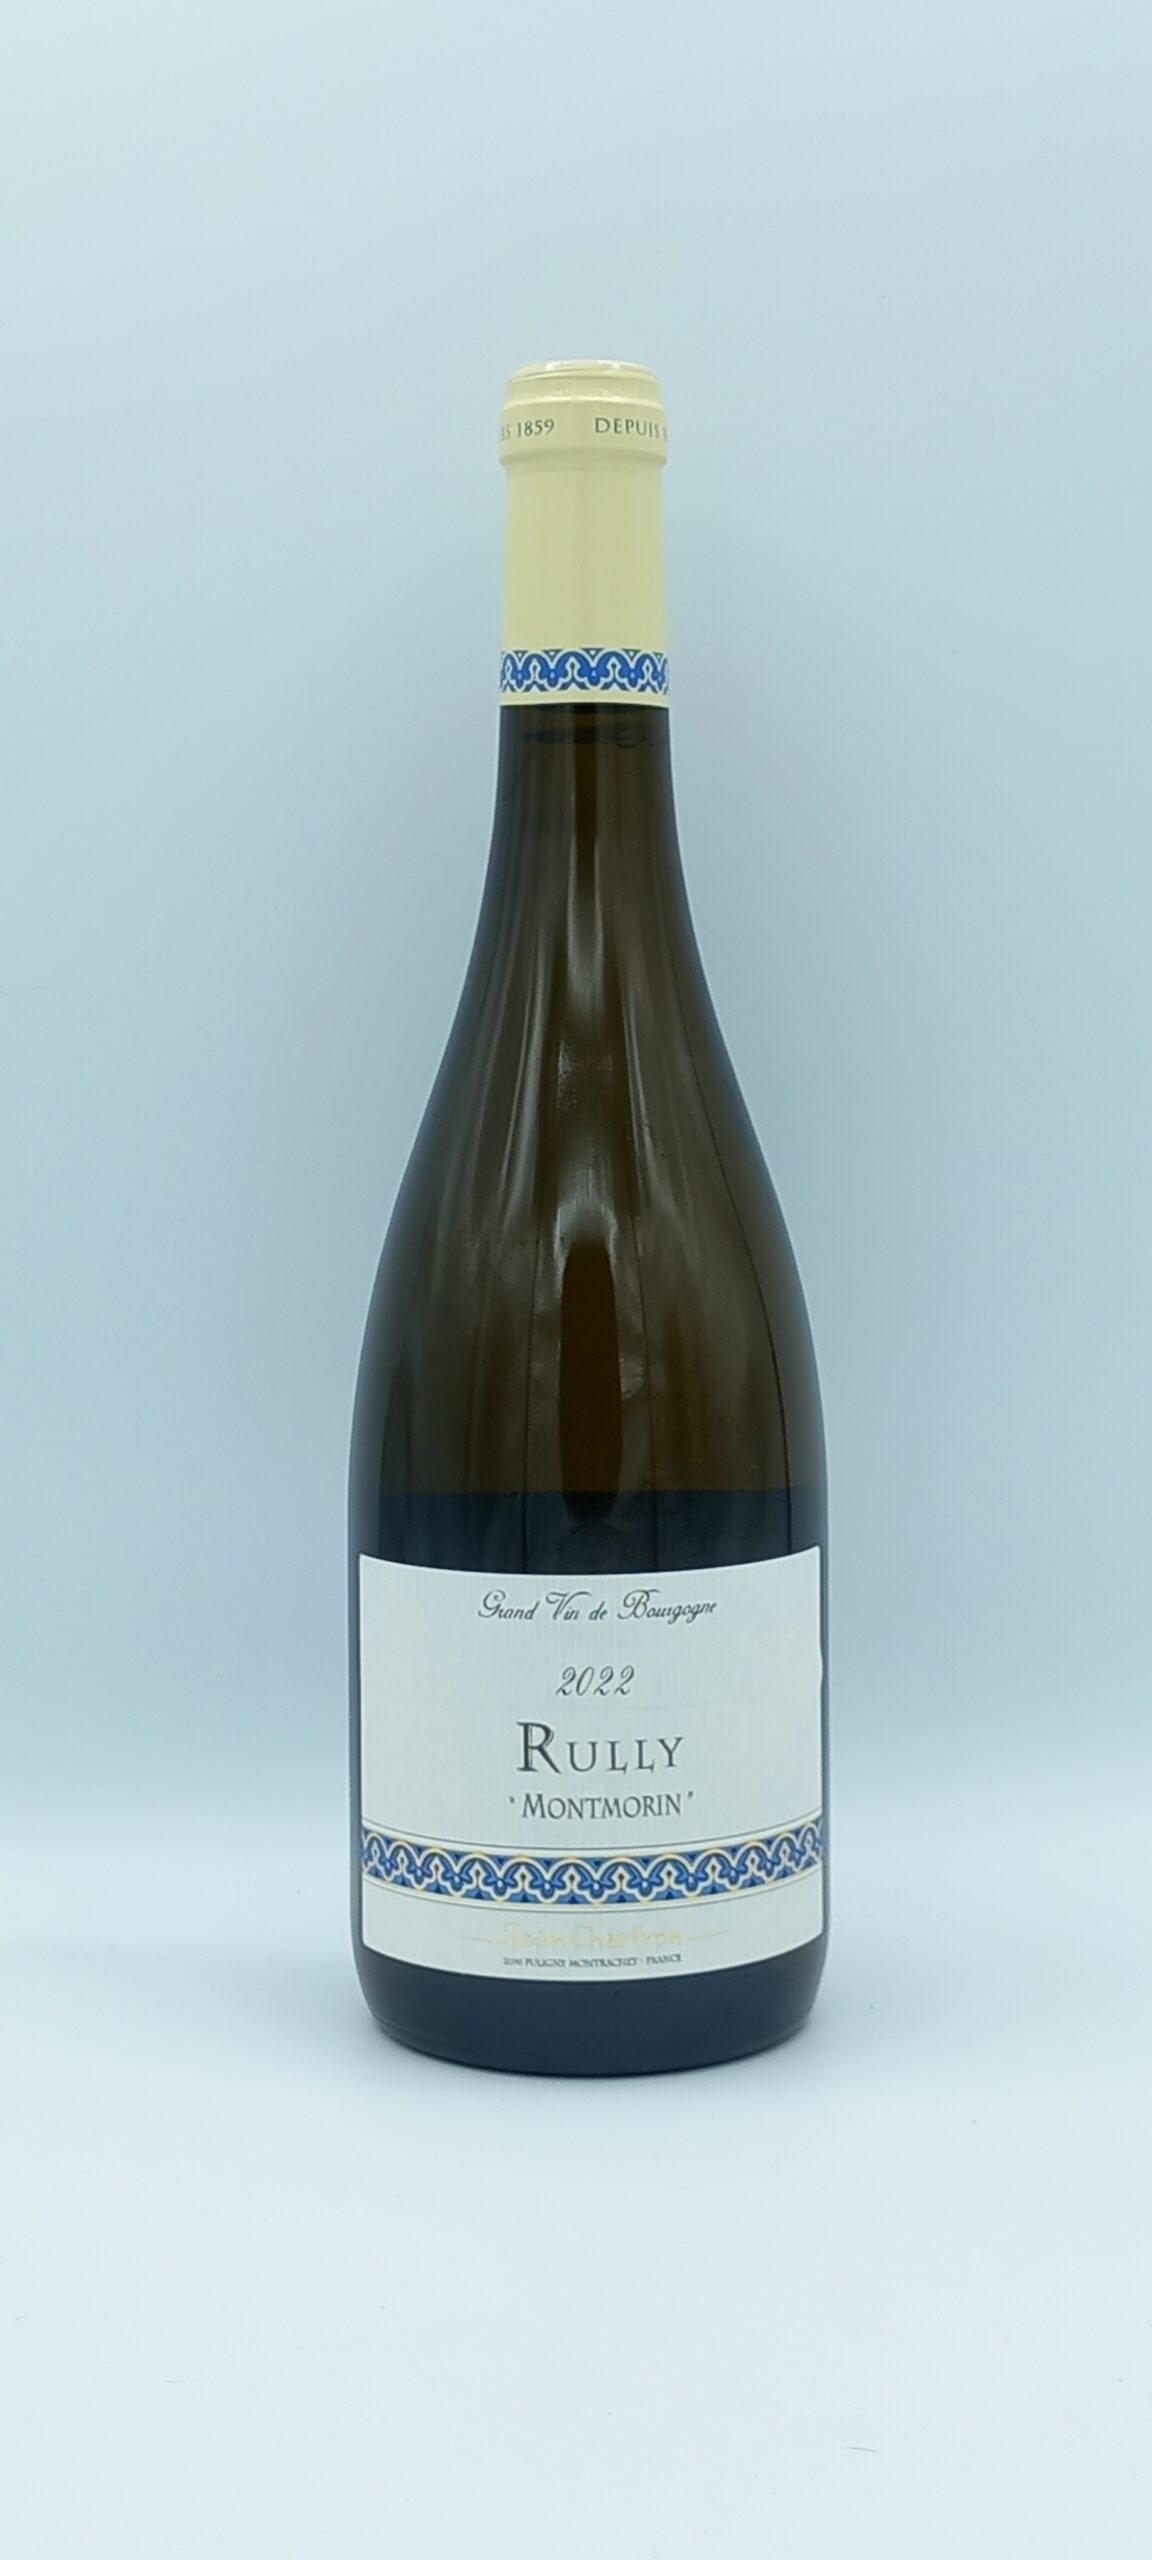 Bourgogne Rully « Montmorin » 2022 Domaine Jean Chartron